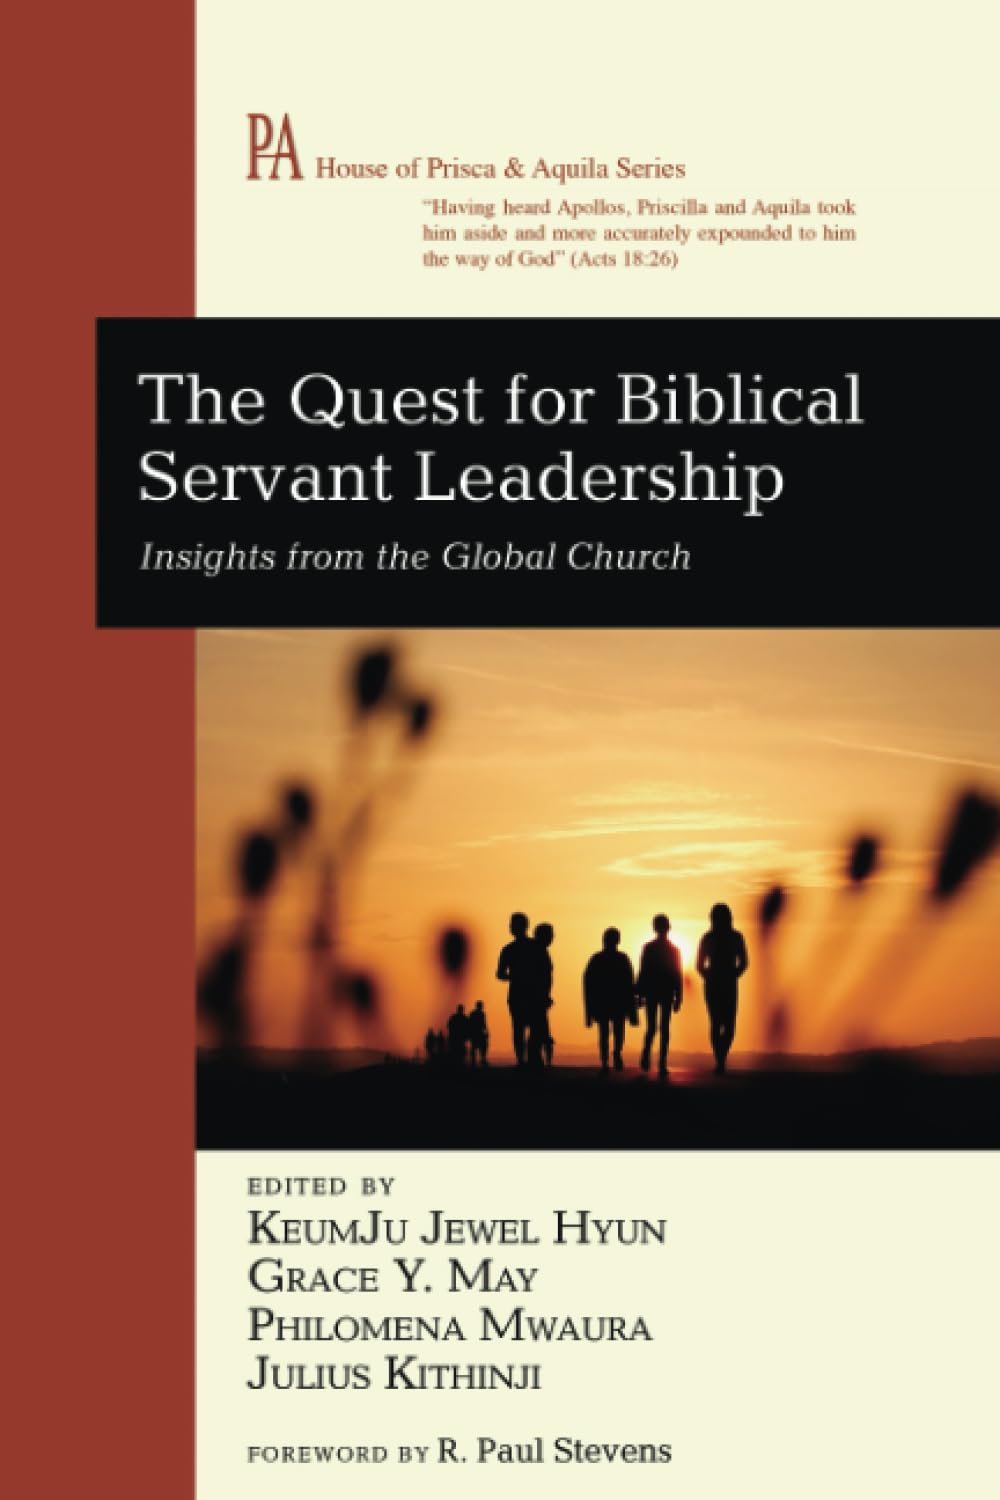 The Quest for Biblical Servant Leadership: Insights from the Global Church